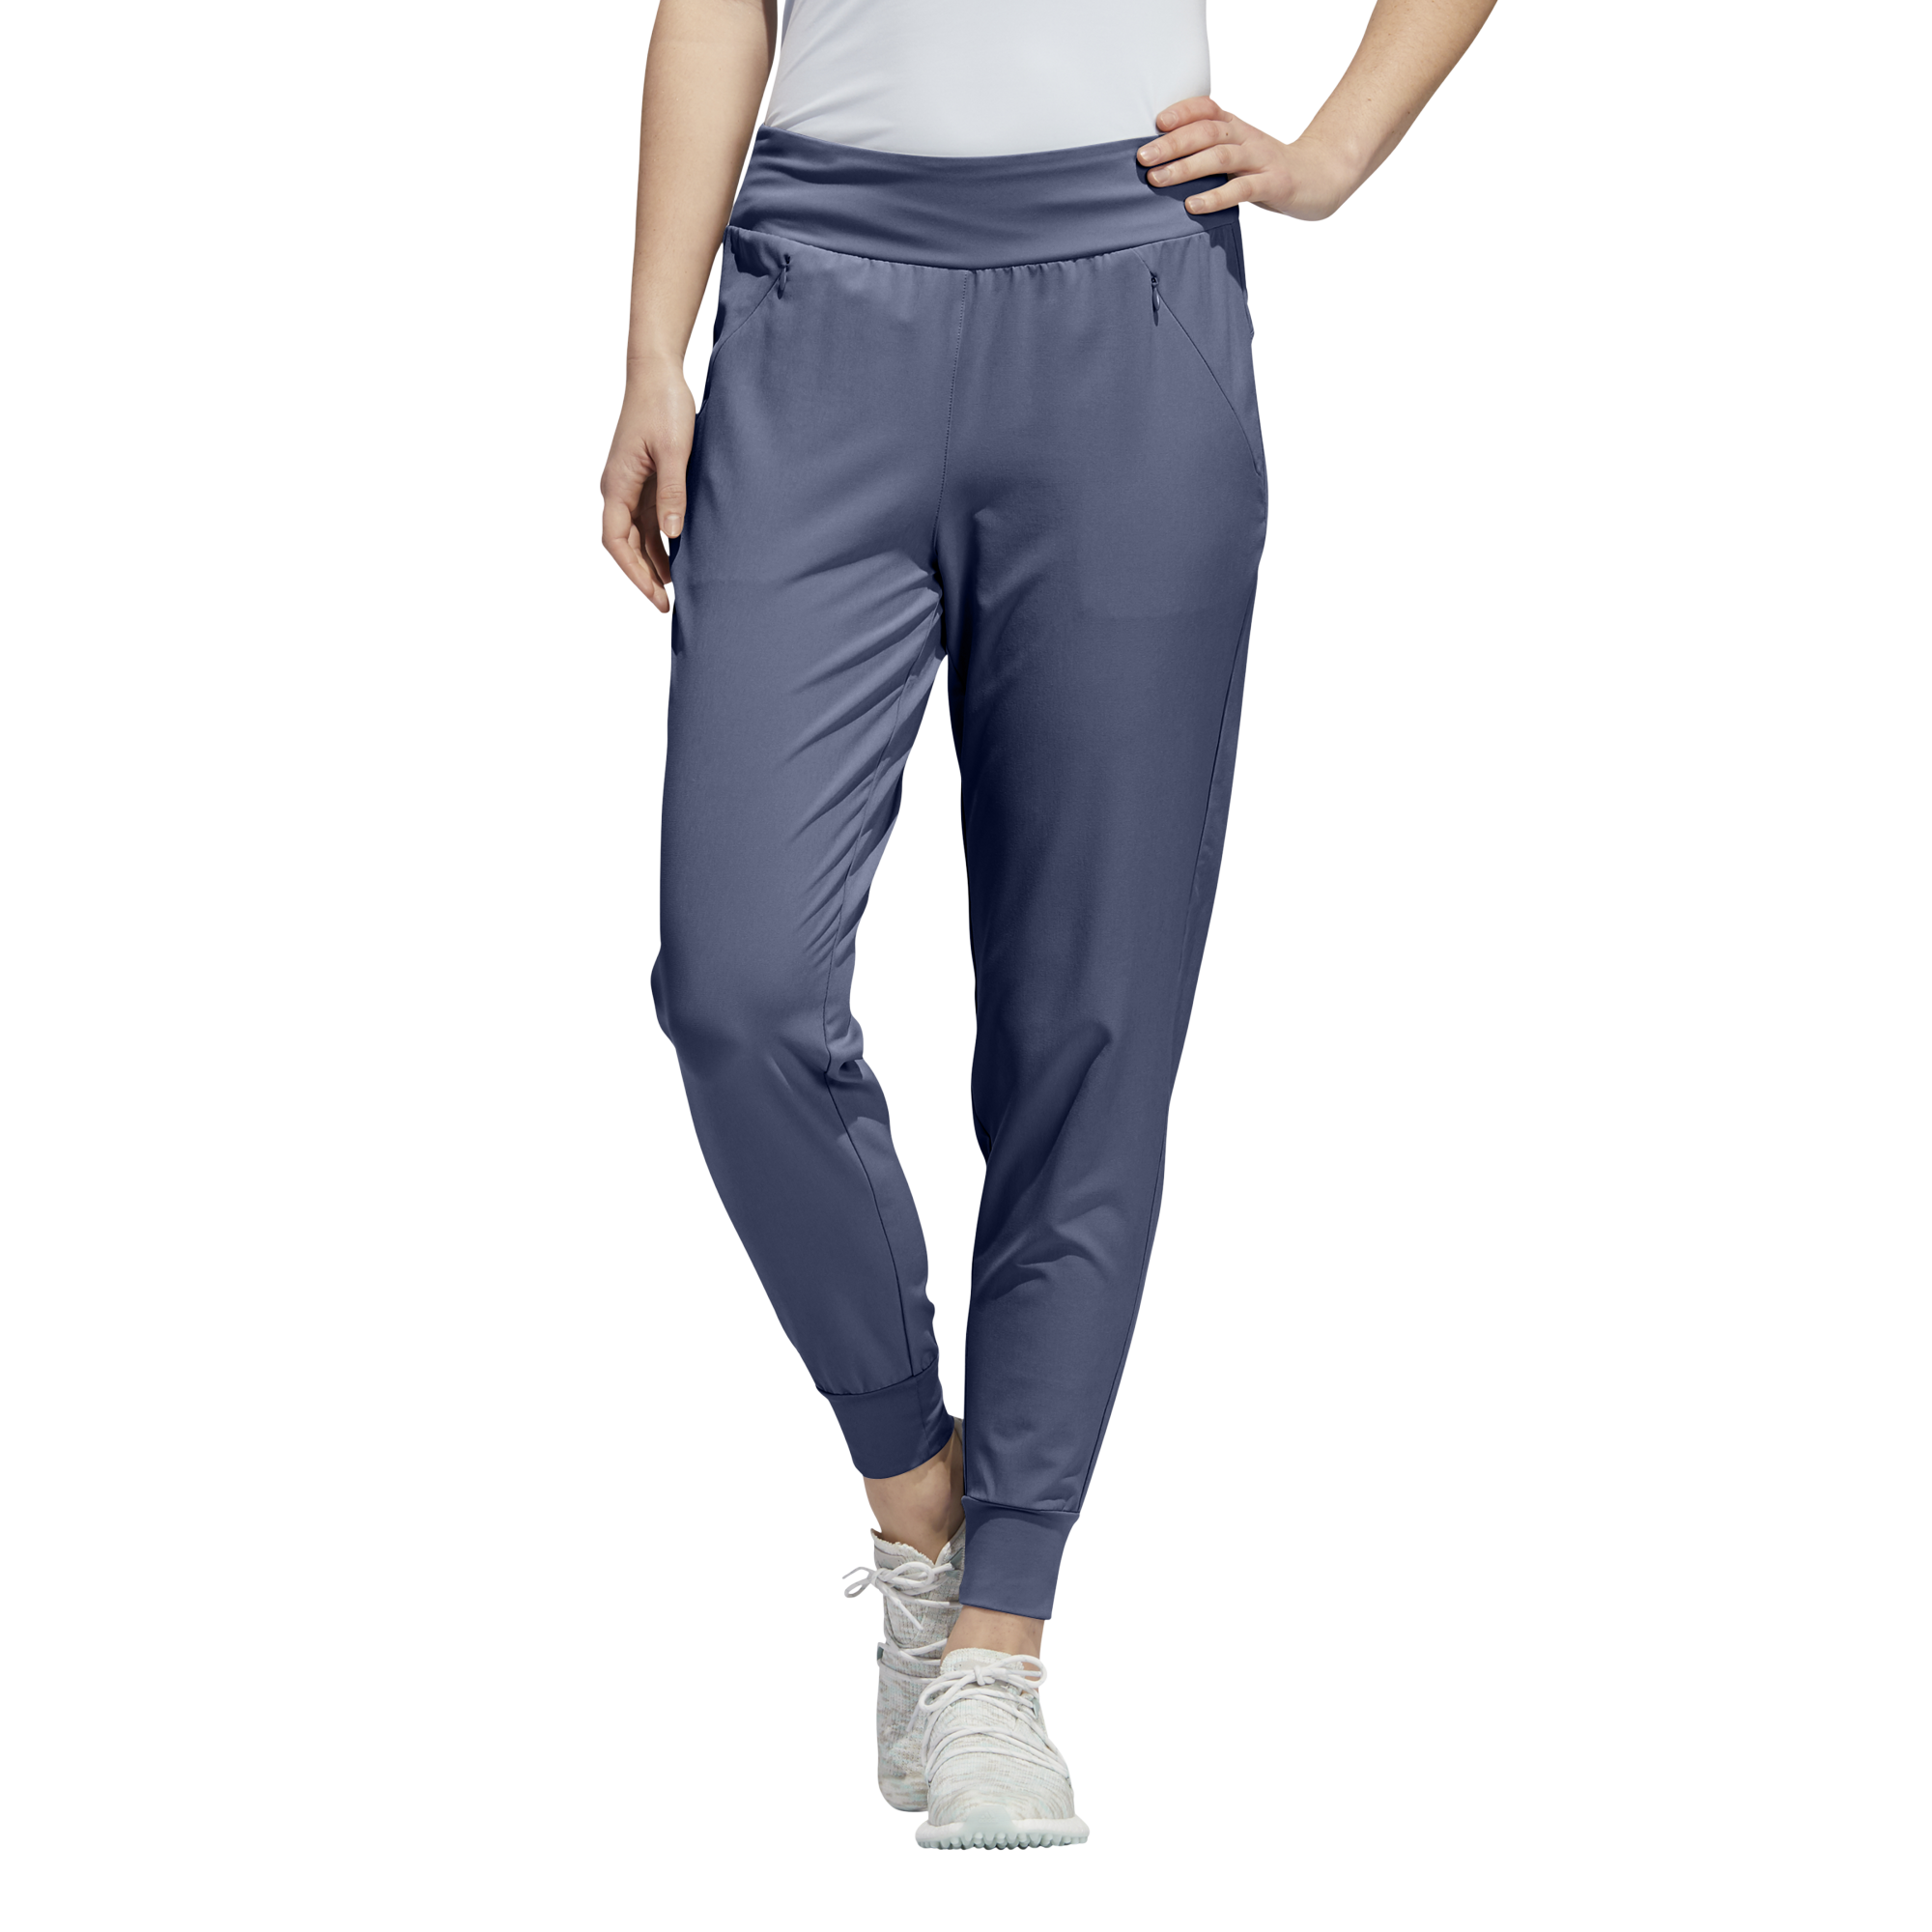 Adidas Beyond the Course Women's Jogger 